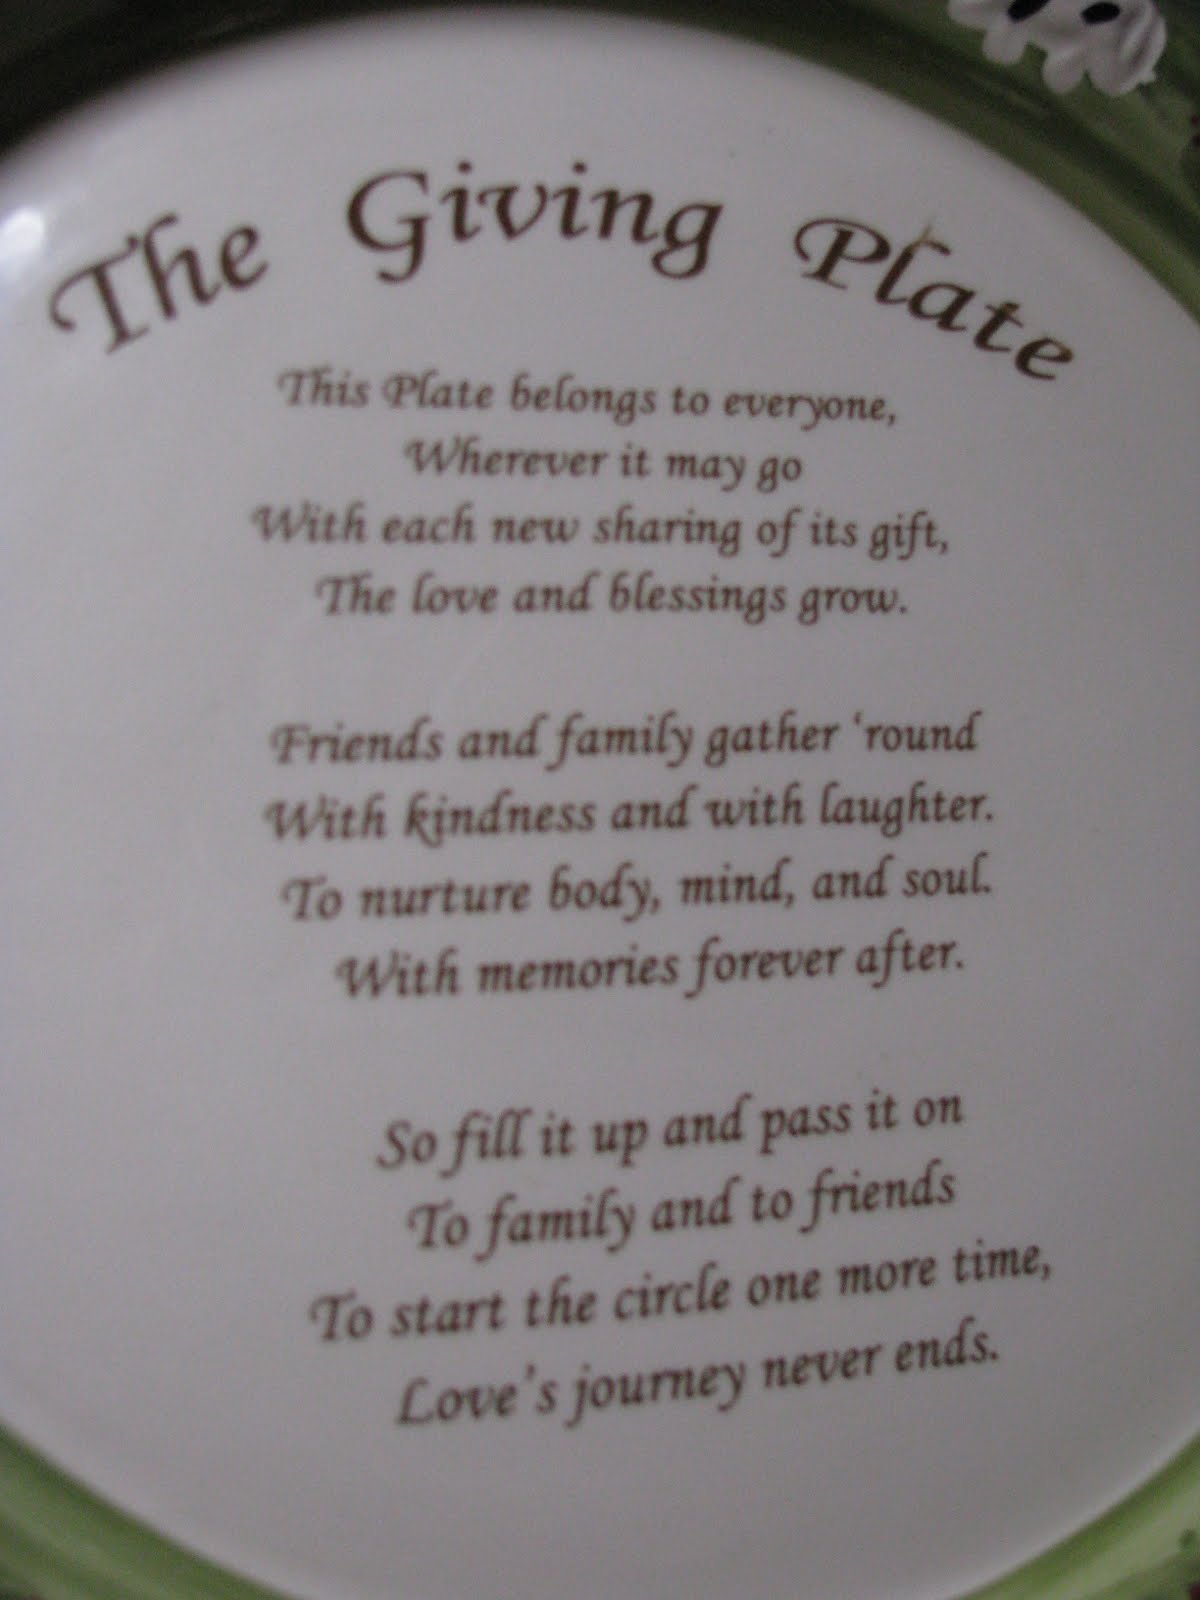 A Short Story: The Giving Plate